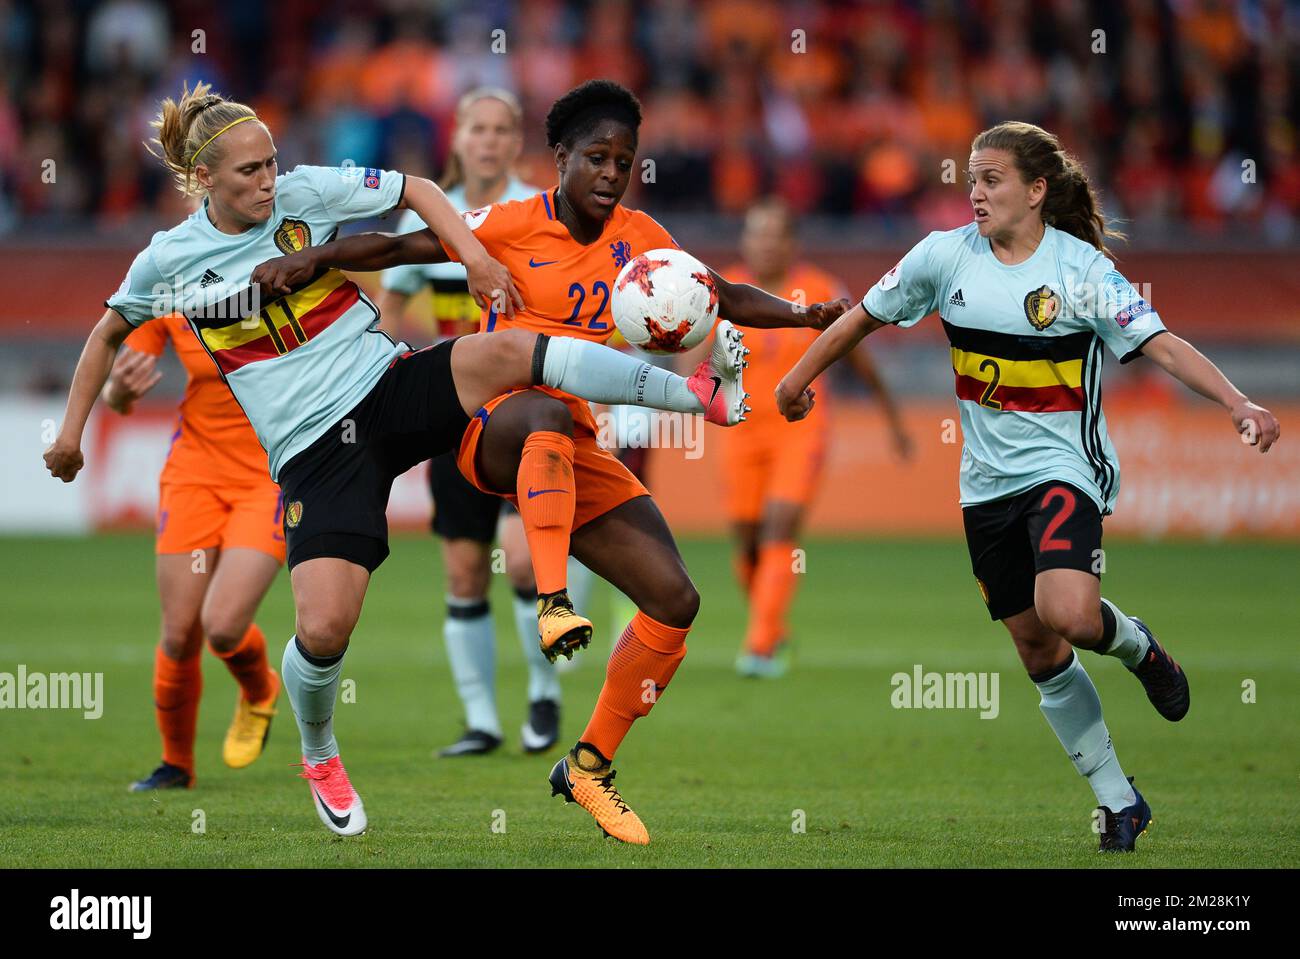 Belgium's Janice Cayman, Dutch Liza van der Most and Belgium's Davina Philtjens pictured in action during a soccer game between Belgian national women's soccer team Red Flames and The Netherlands, the third game in group A in the group stage of the Women's European Championship 2017 in the Netherlands, Monday 24 July 2017 in Tilburg, The Netherlands. BELGA PHOTO DAVID CATRY Stock Photo